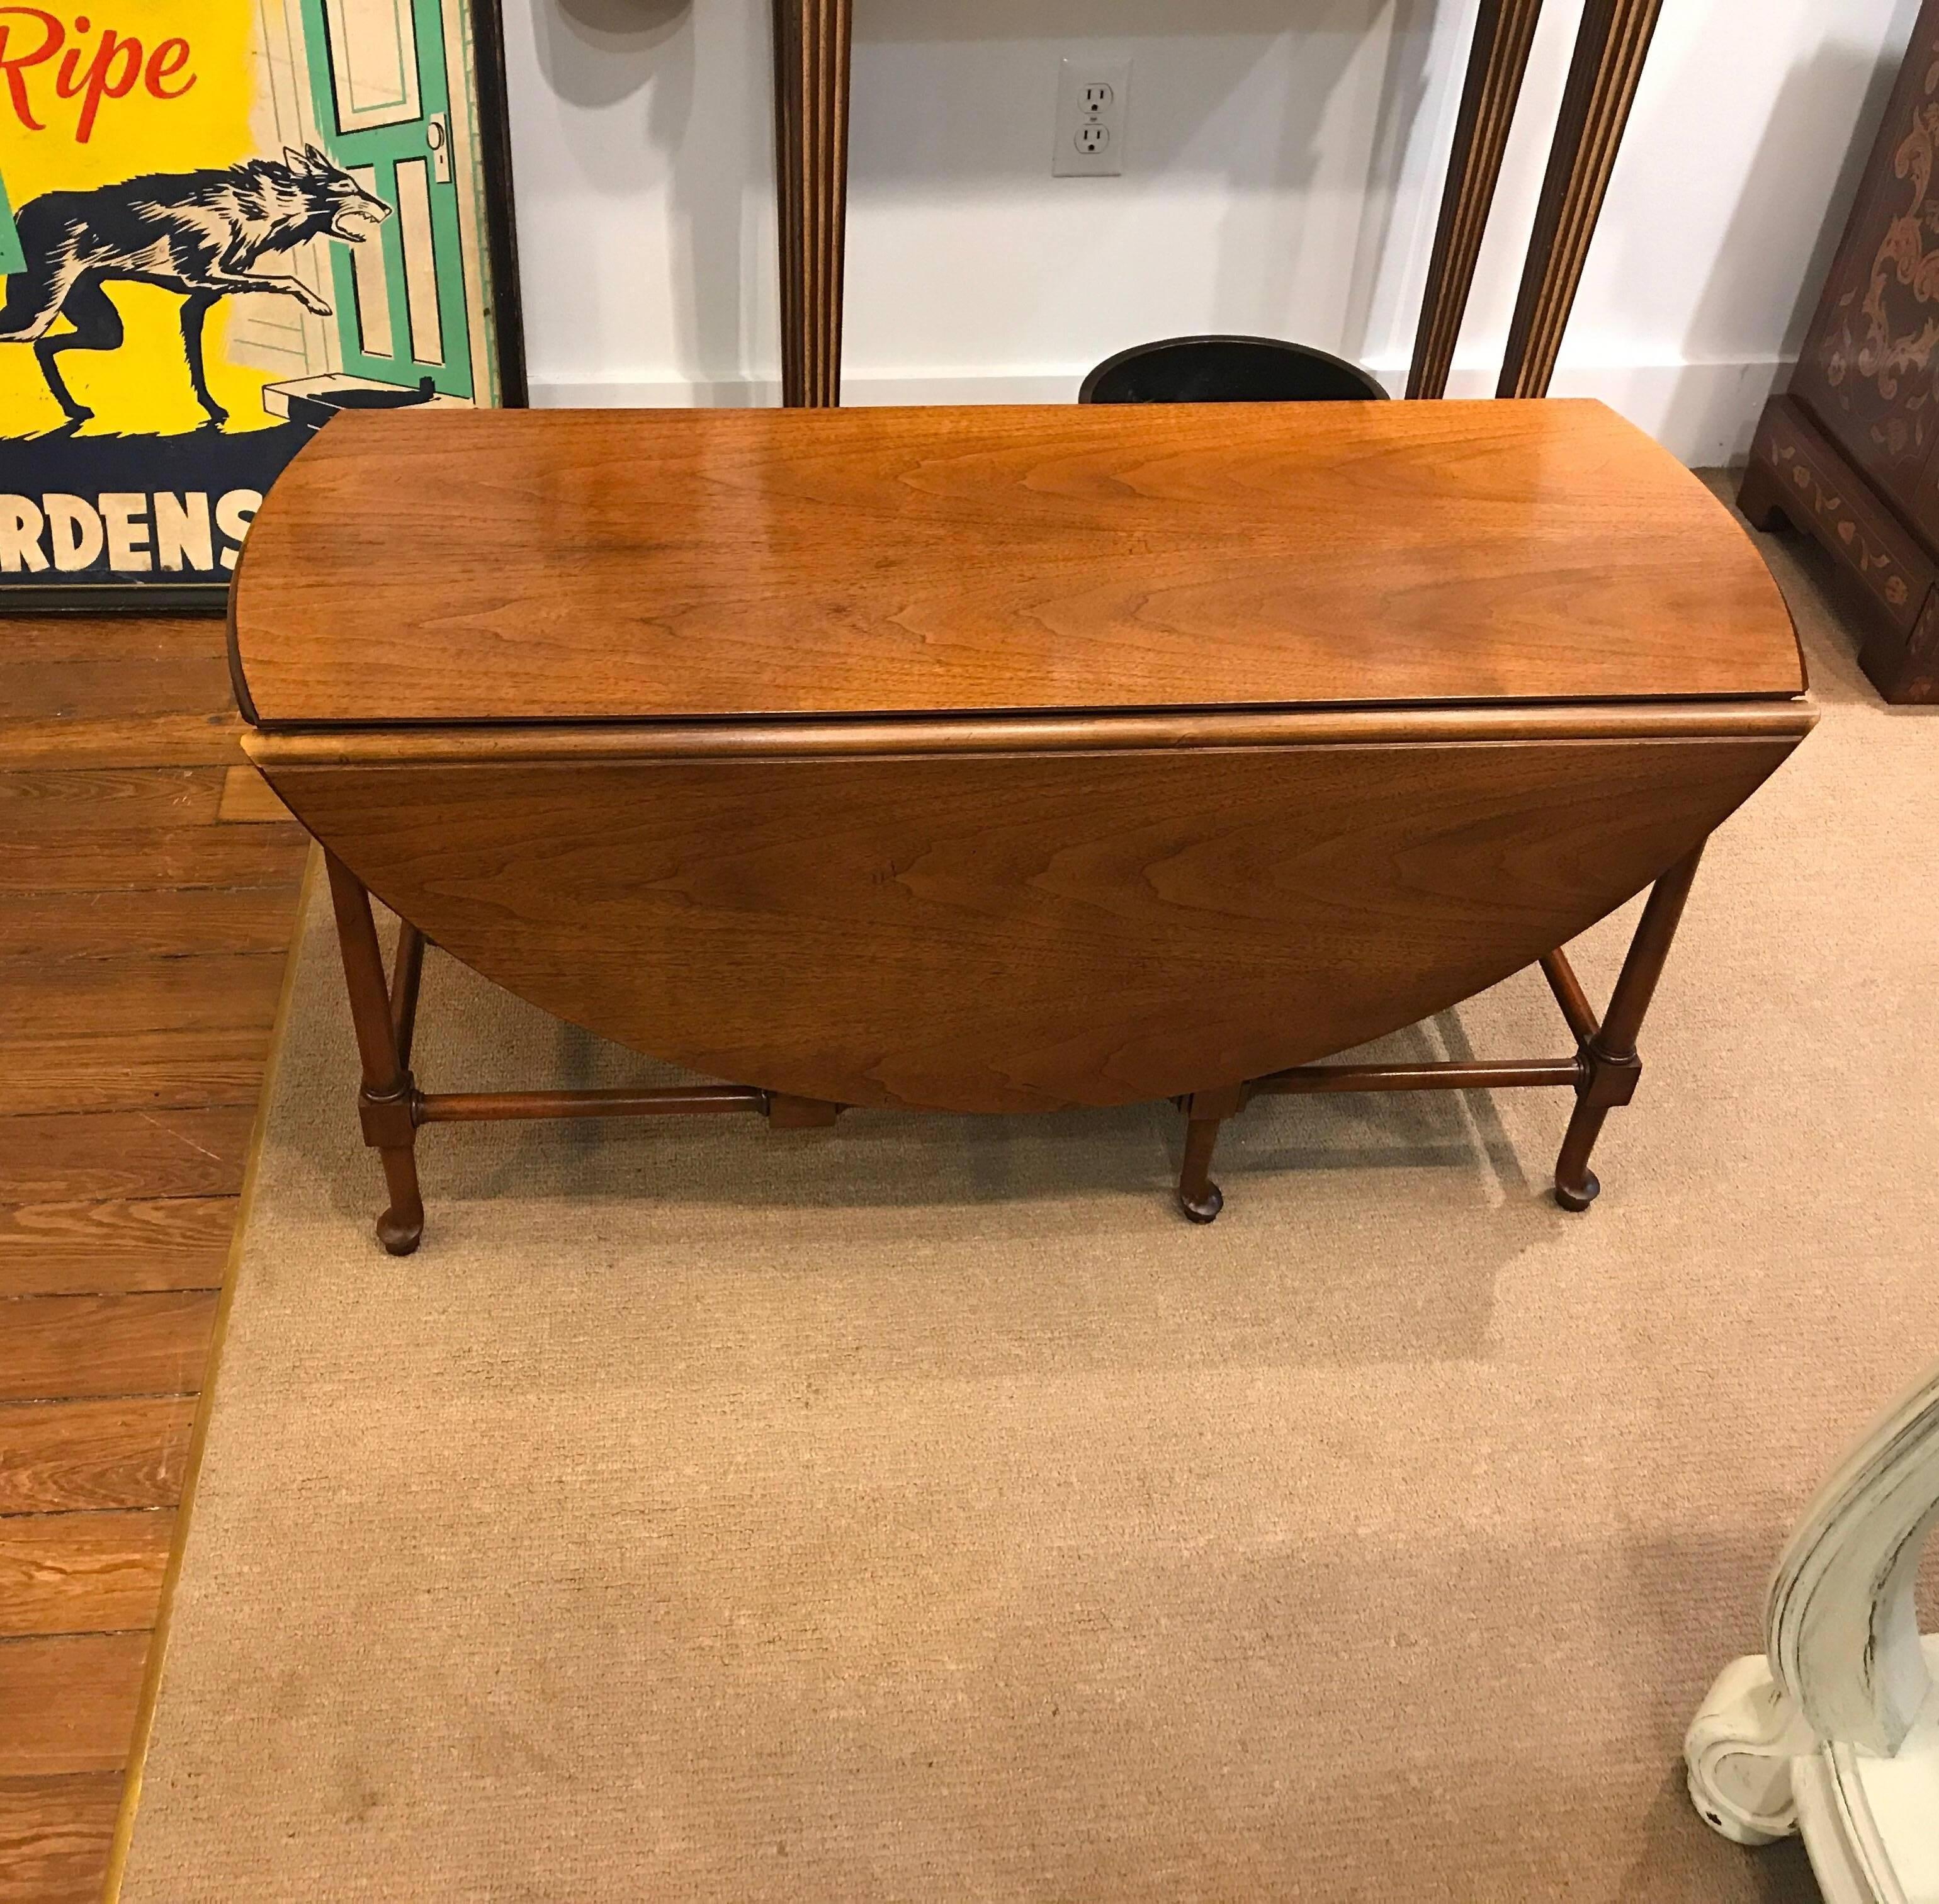 Traditionally styled mahogany drop-leaf coffee table made by Baker Furniture. A Great space saver that can be used with leaves down at 38 inches by 14.5 inches and when opened is 38 inches in diameter.